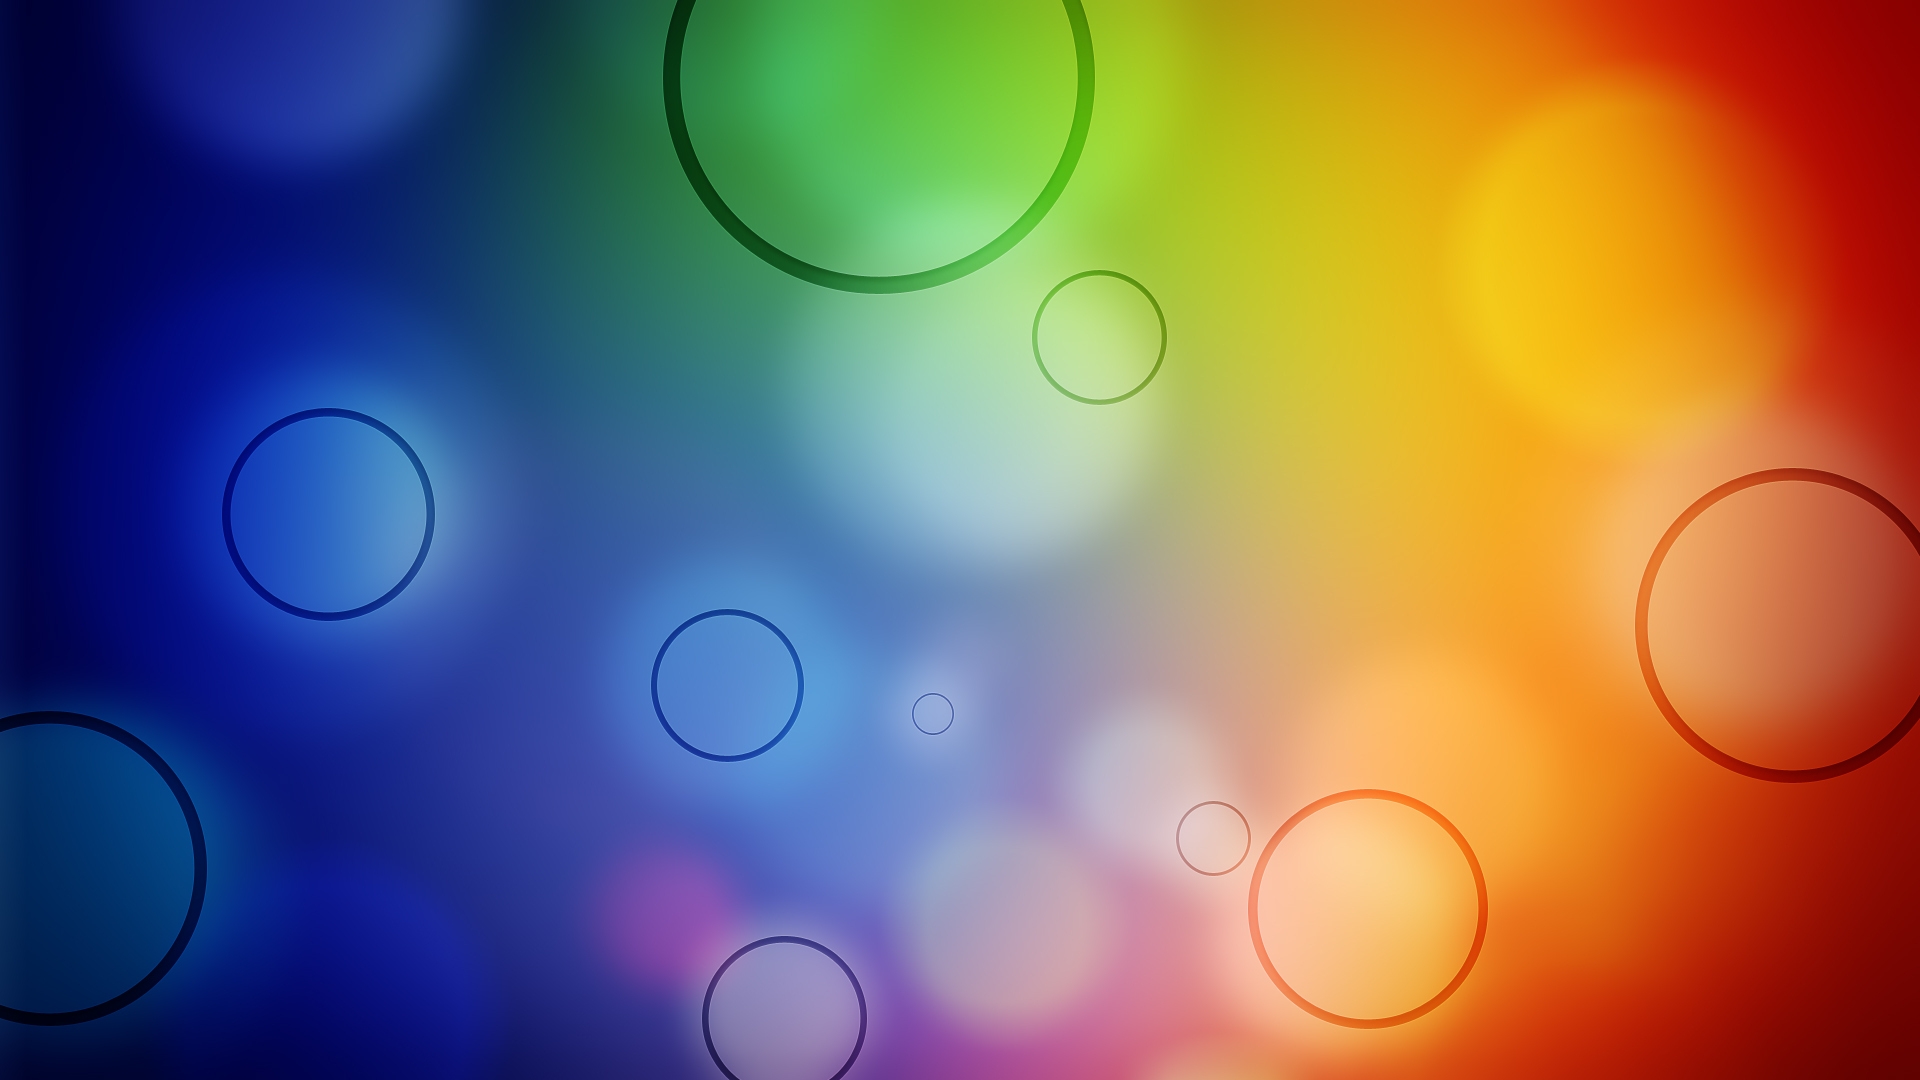 Download Wallpaper 1920x1080 Background, Circles, Spots, Colorful ...